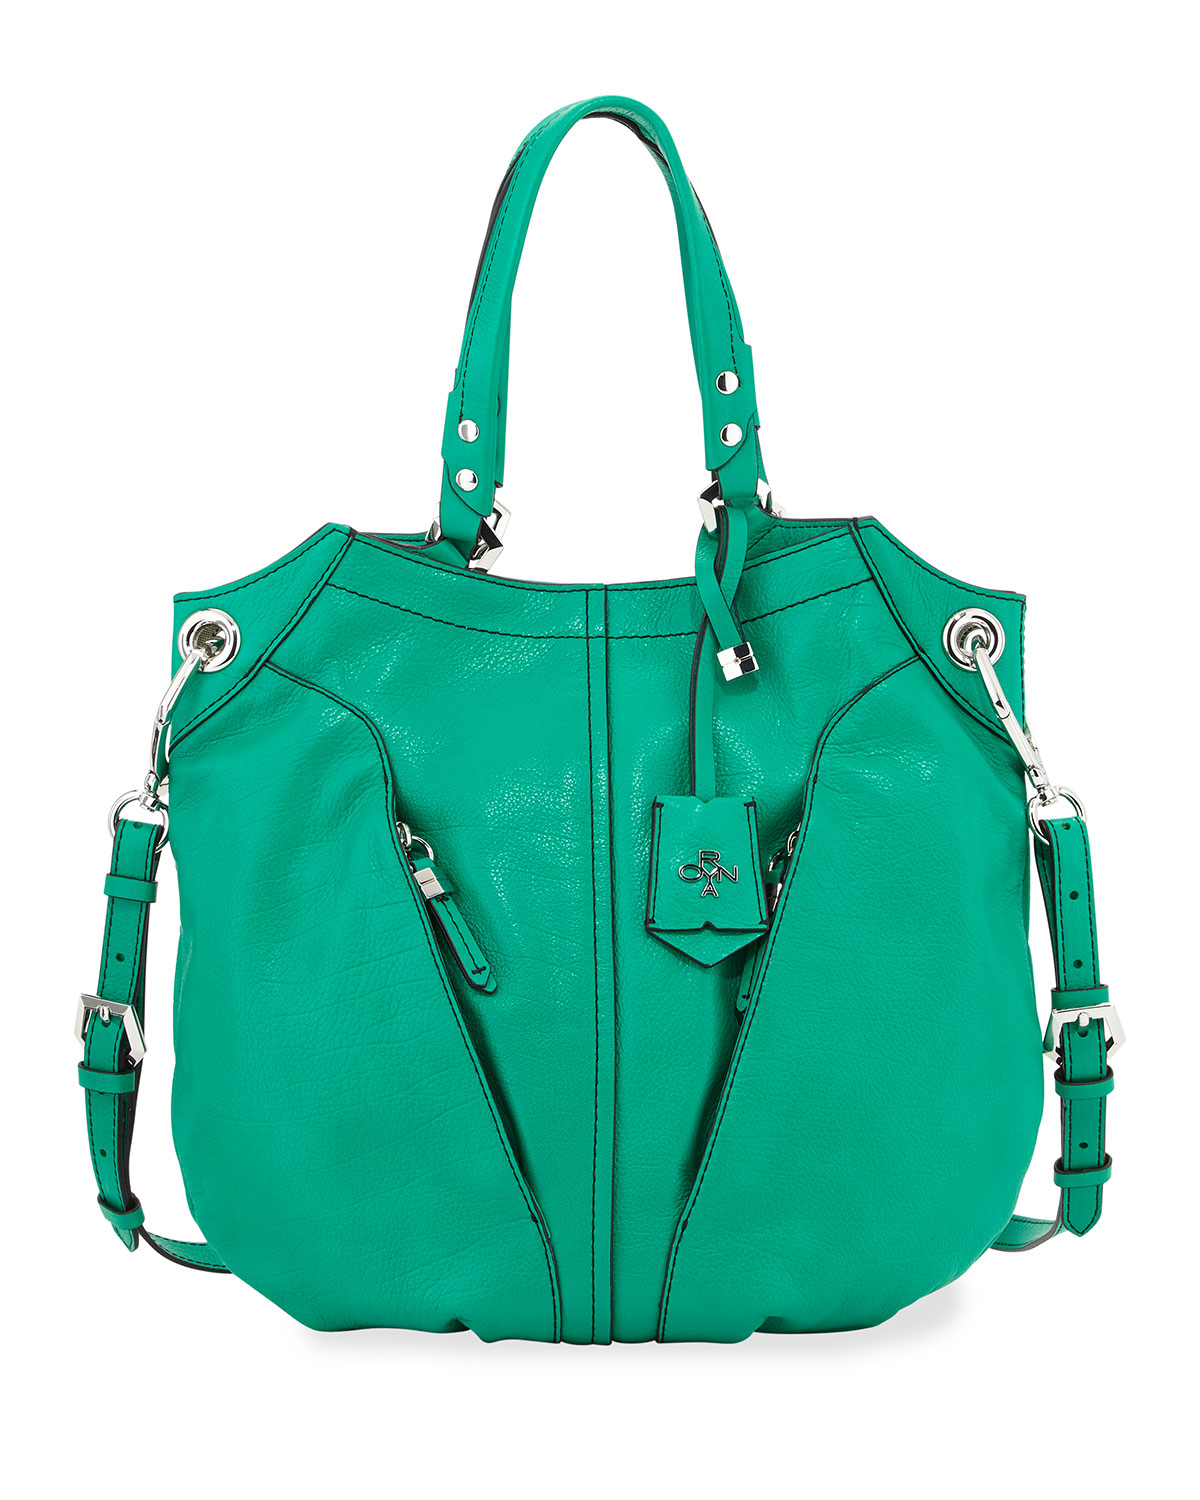 orYANY Victoria Leather Tote Bag in Green - Lyst